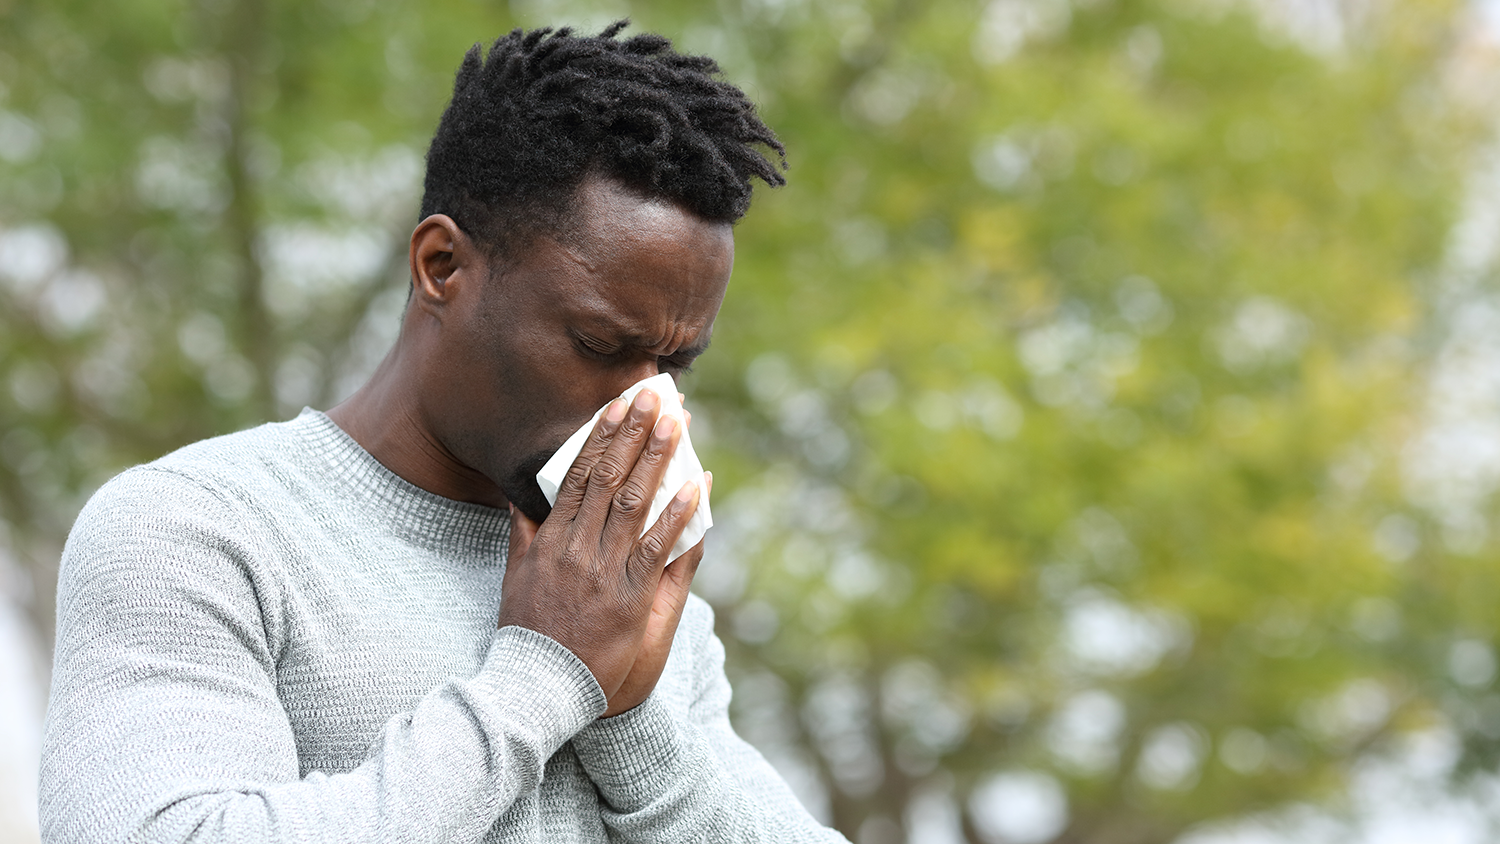 Person blowing their nose on a wipe in a park - Allergy Season is Getting Worse - Thanks to Climate Change - College of Natural Resources News NC State University